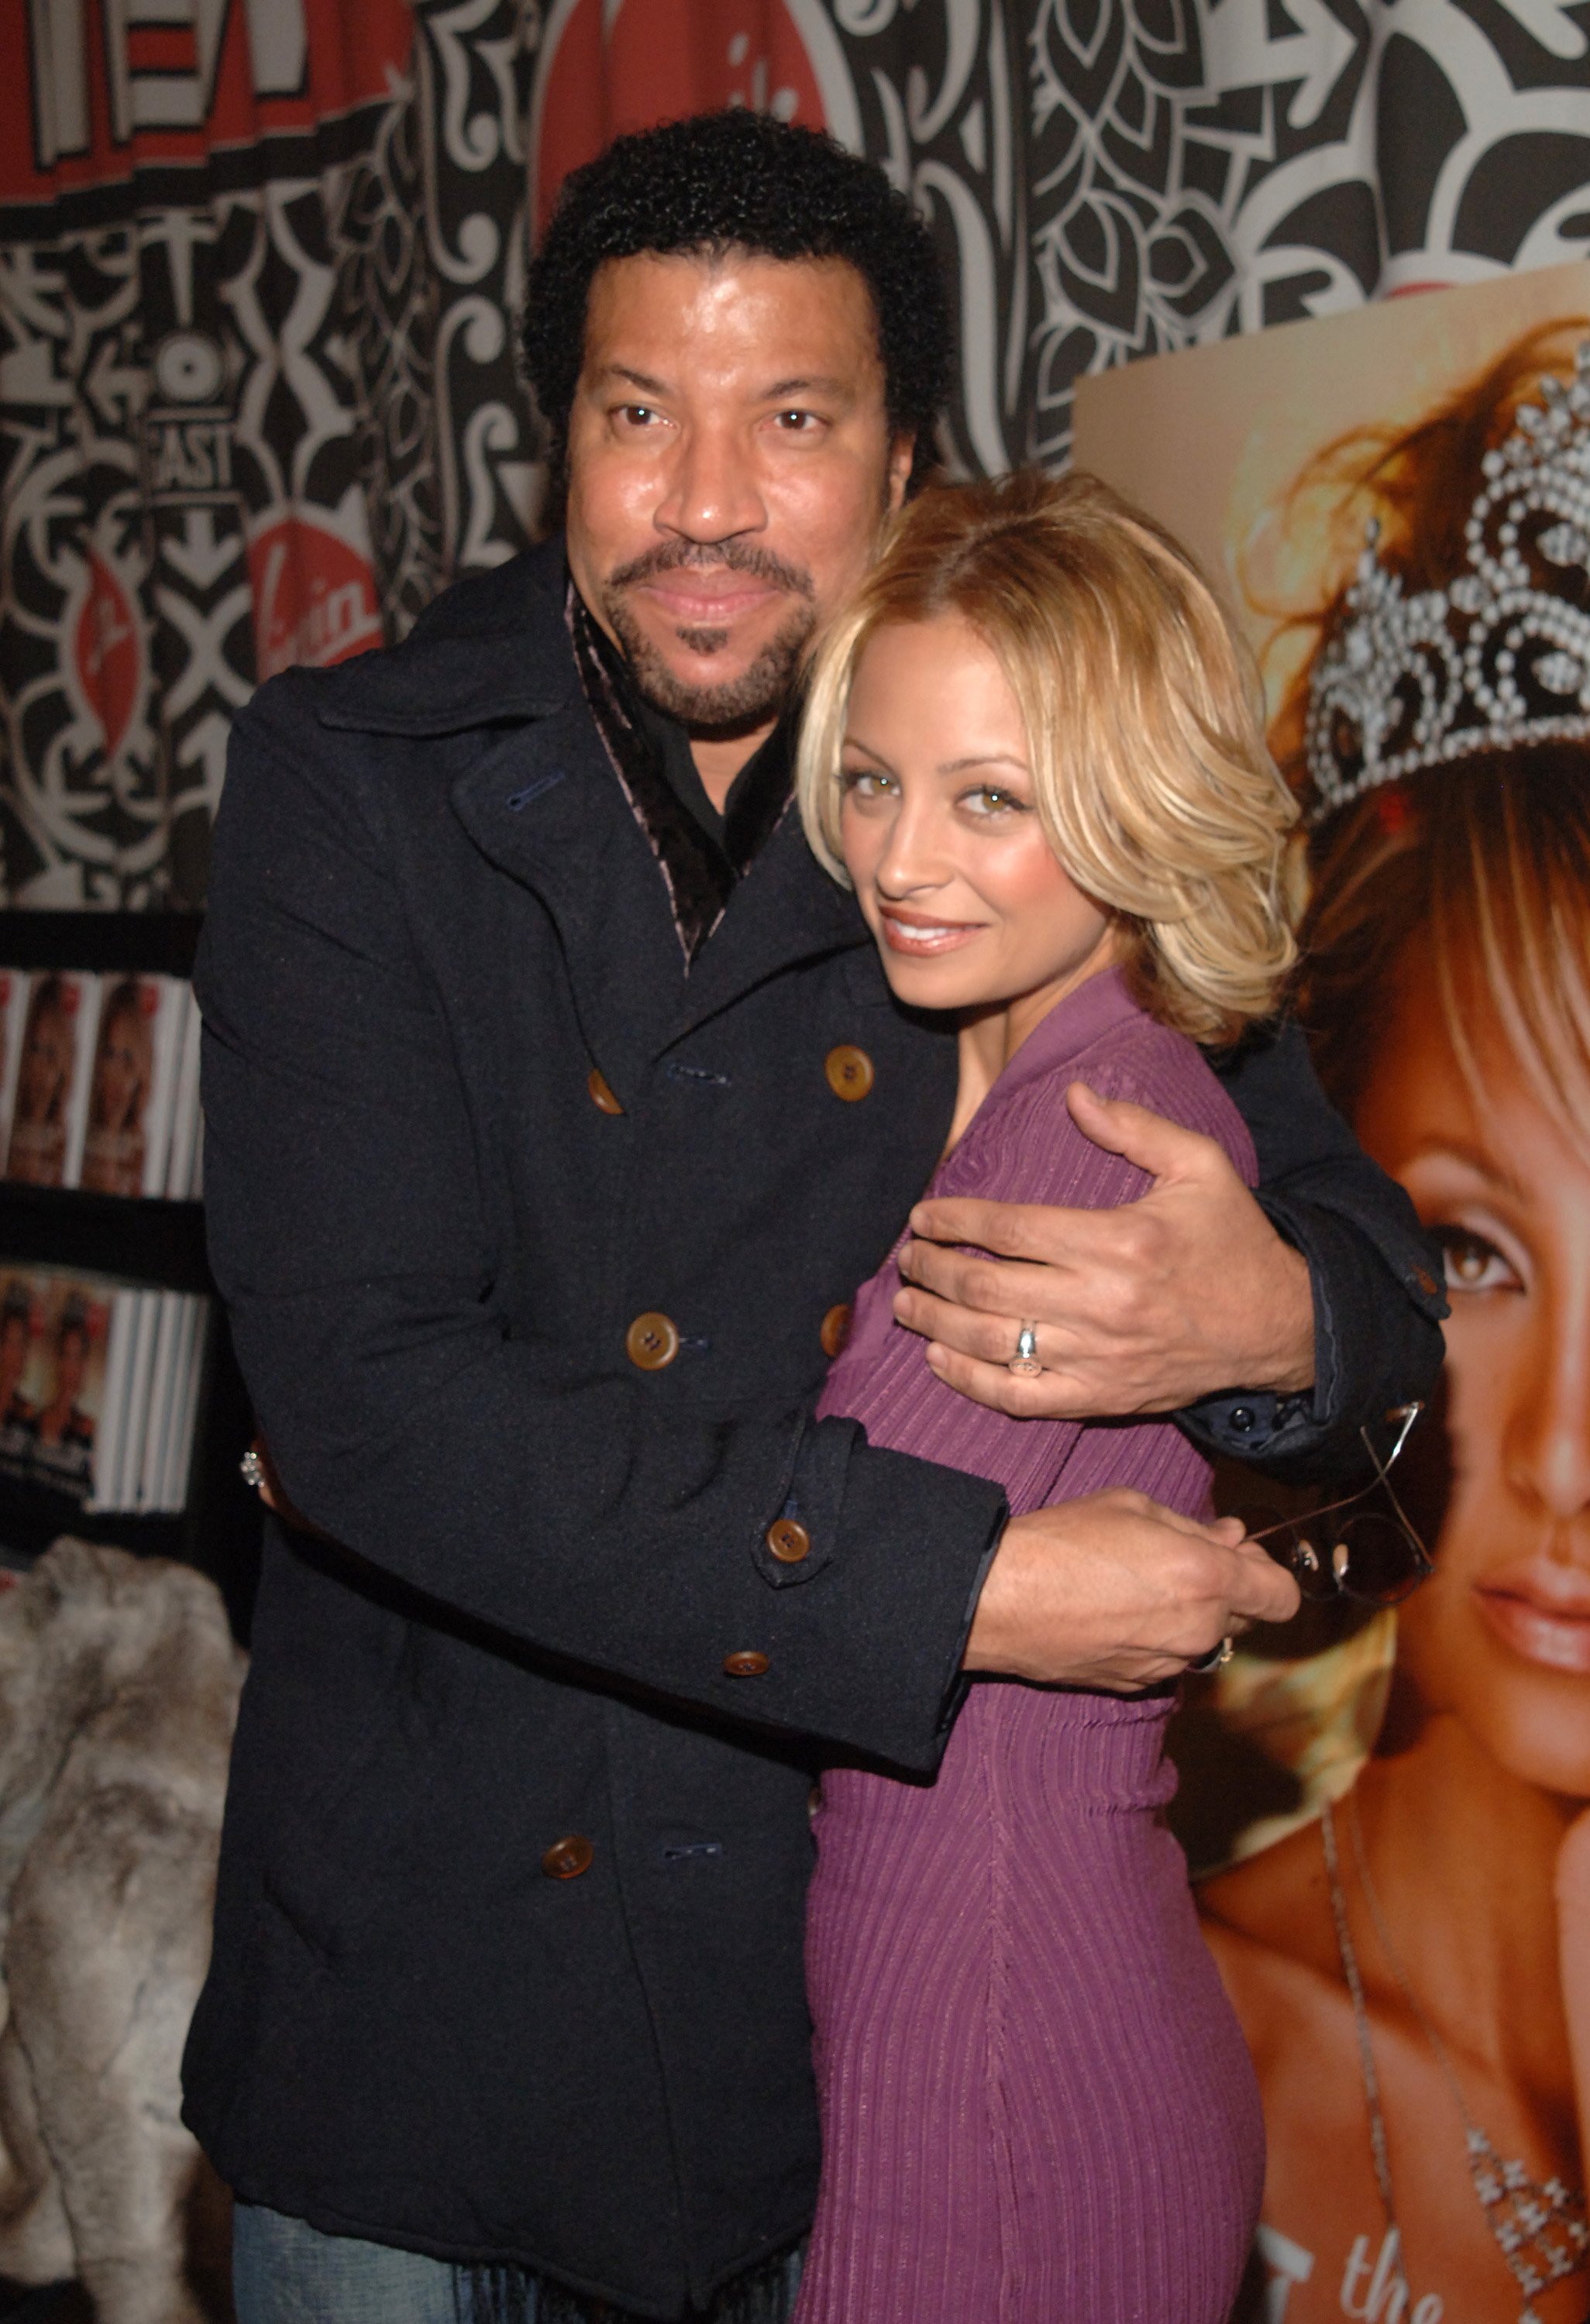 Lionel Richie and Nicole Richie at the 'The Truth About Diamonds' book signing at the Virgin Mega Store in Times Square on November 10, 2005 in New York City. | Photo: GettyImages/Global Images of Ukraine